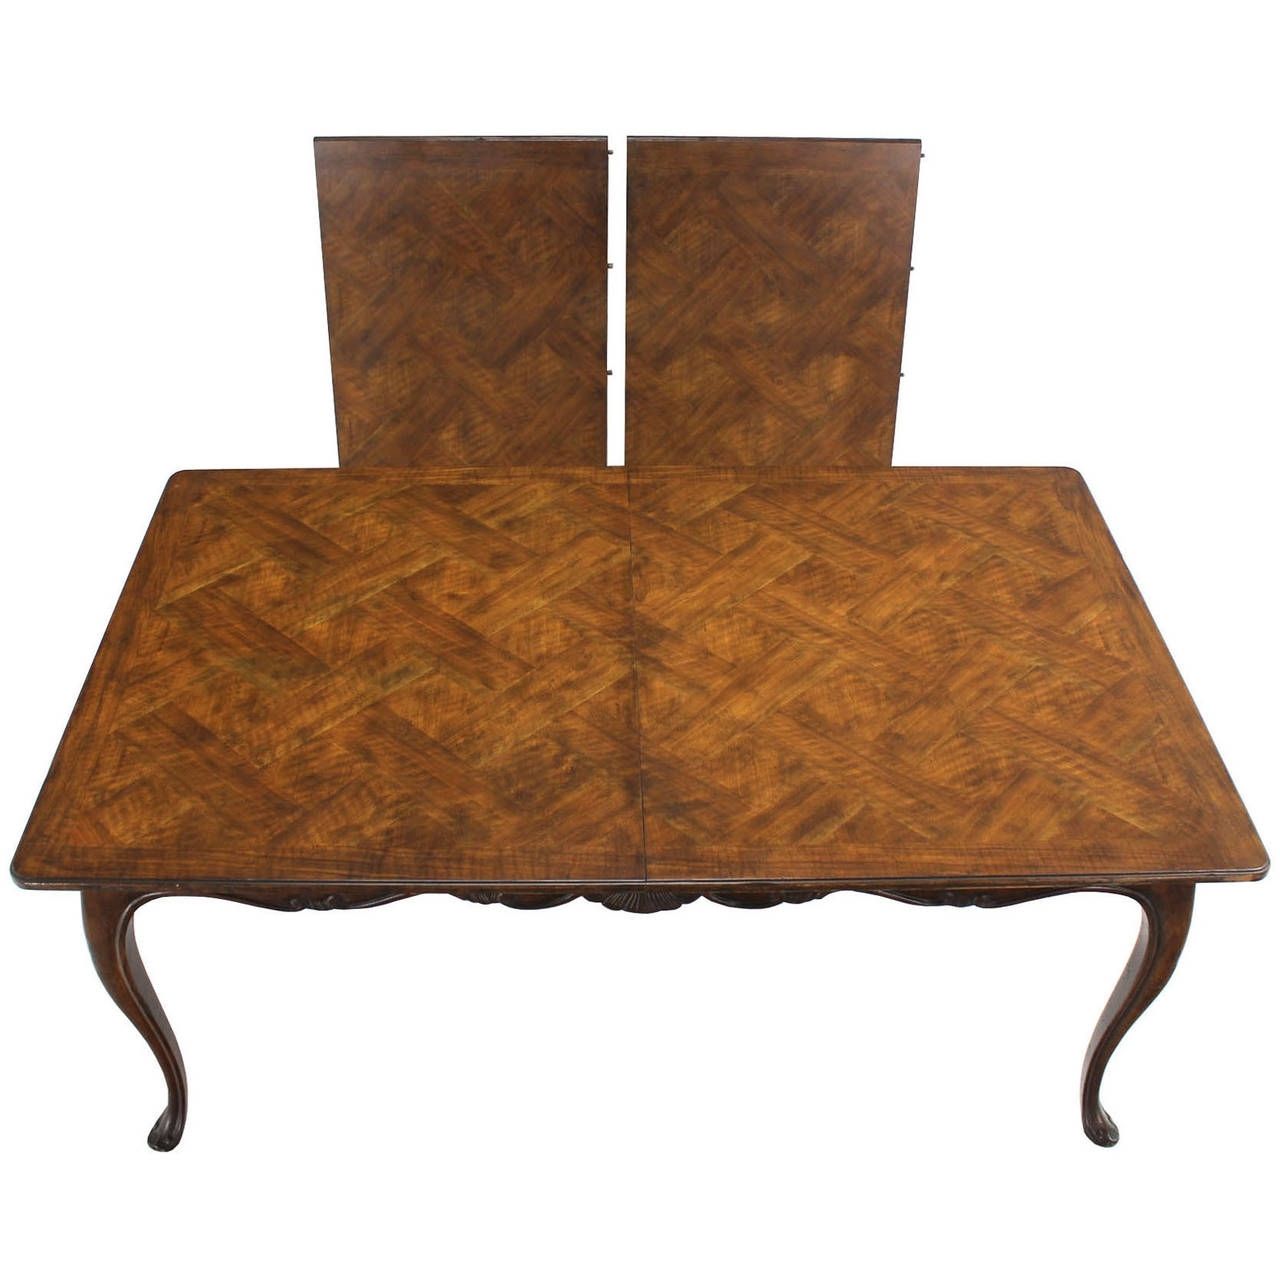 Parquet Dining Chairs Intended For Best And Newest Burwood Walnut Dining Tableheritage W/ One Extension Leaf (View 11 of 20)